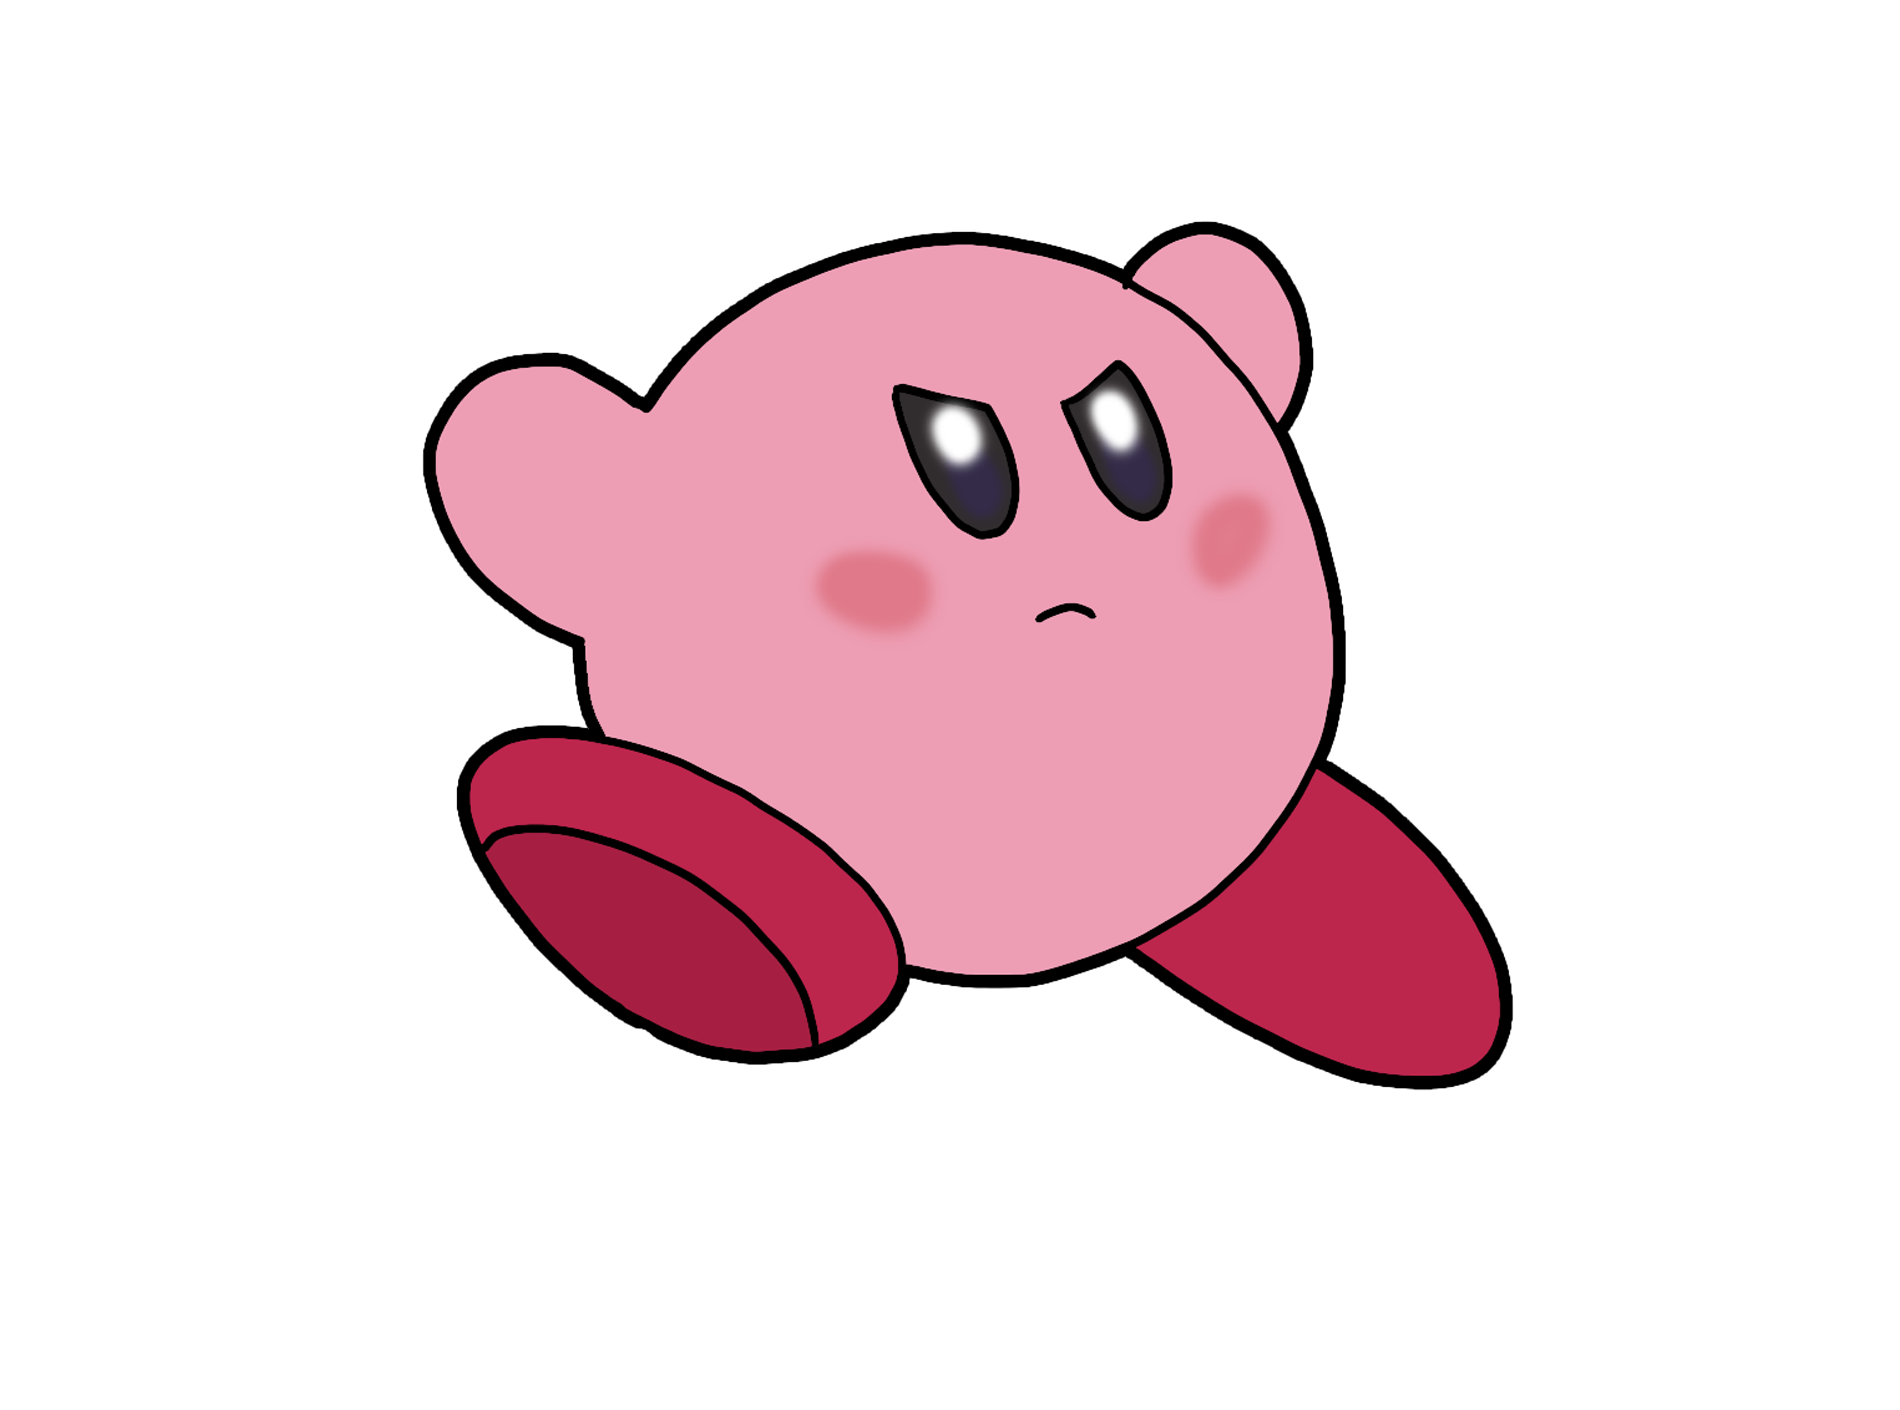 wii fit trainer smash bros kirby